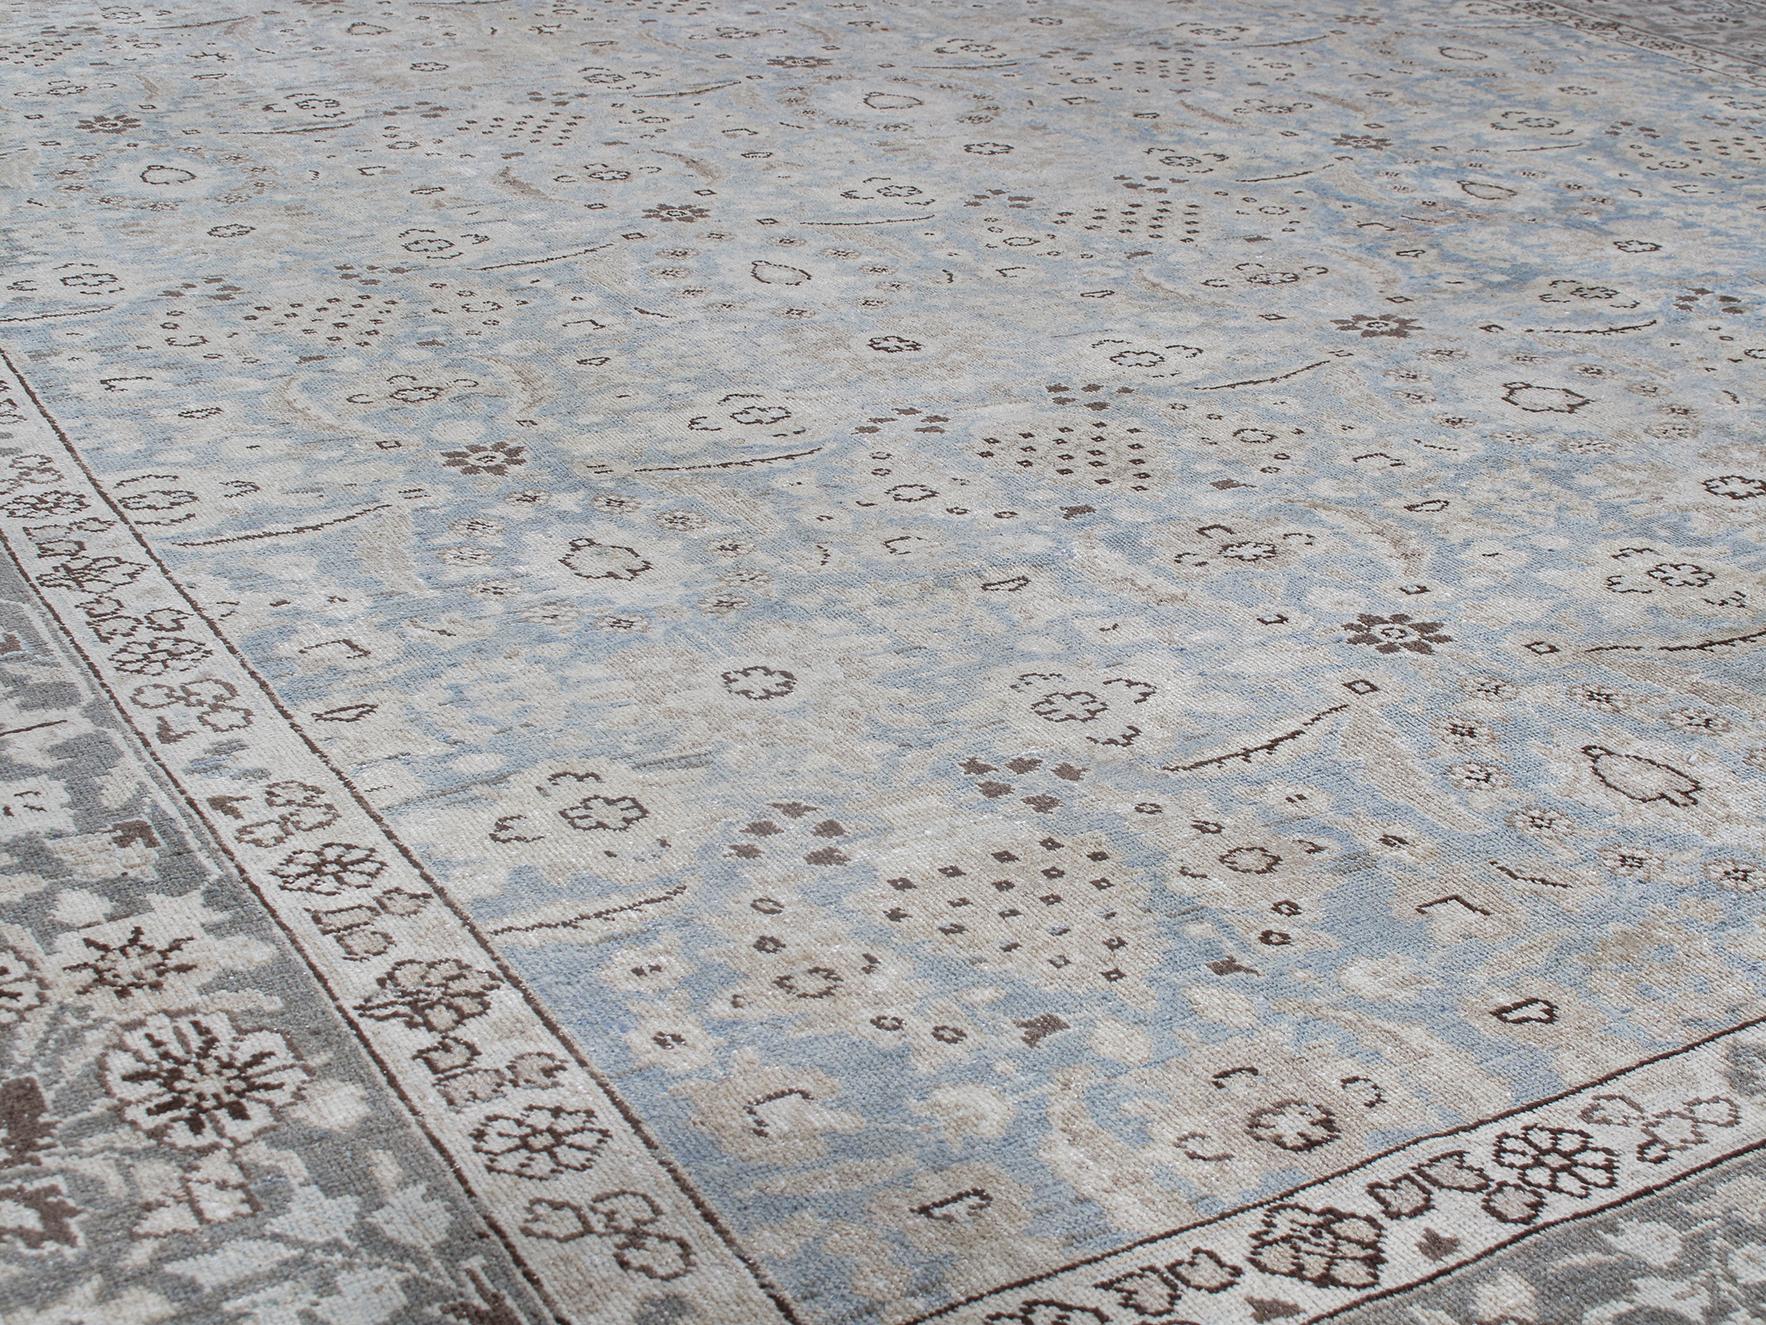 Made in Iran, this Early 20th Century Antique Persian Tabriz wool hand-knotted rug features an all-over design with blue background and grey border. Tabriz rugs are crafted in the big city of the same name and resemble high style tradition that goes